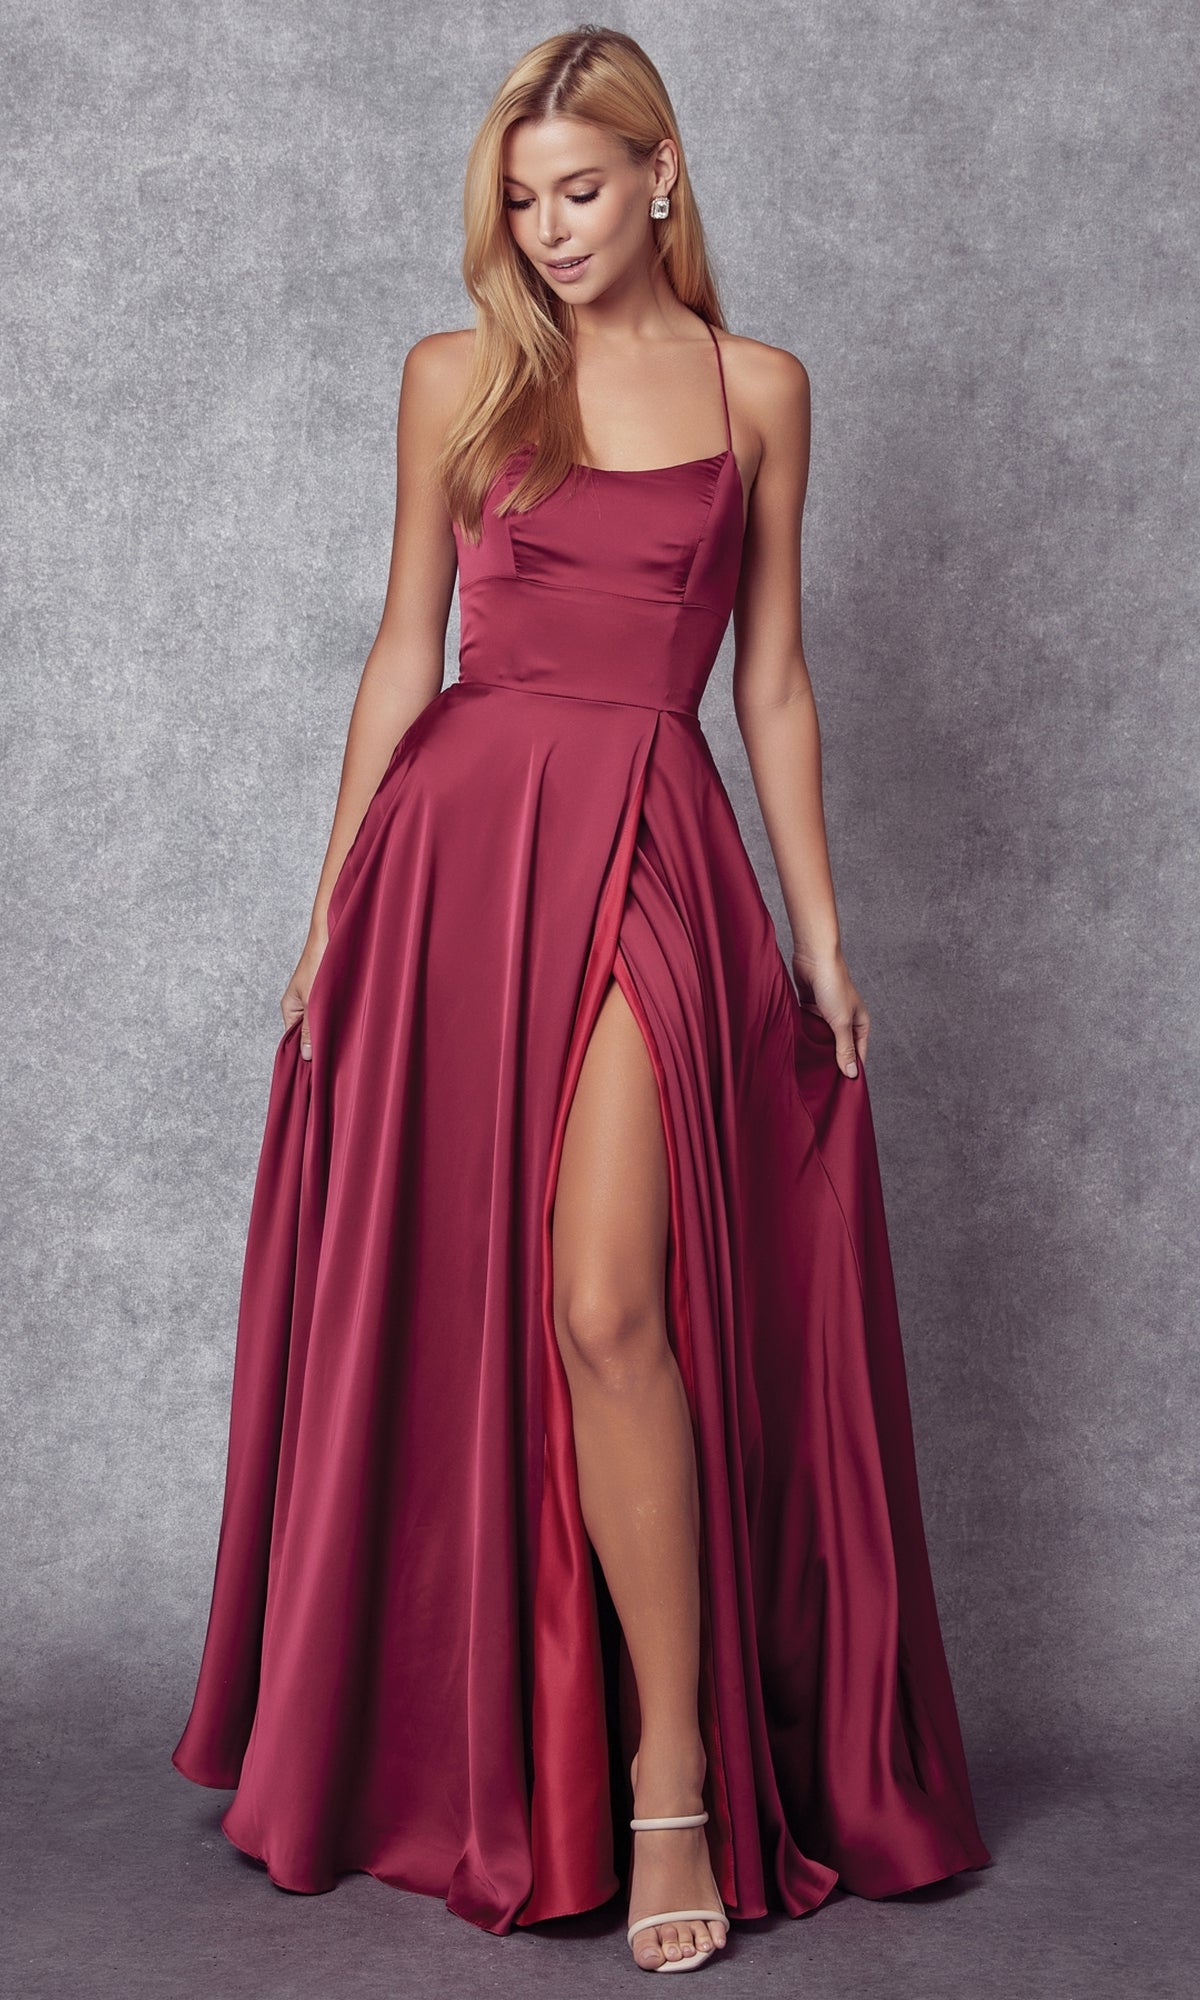 Strappy-Back Simple Long A-Line Prom Dress 278